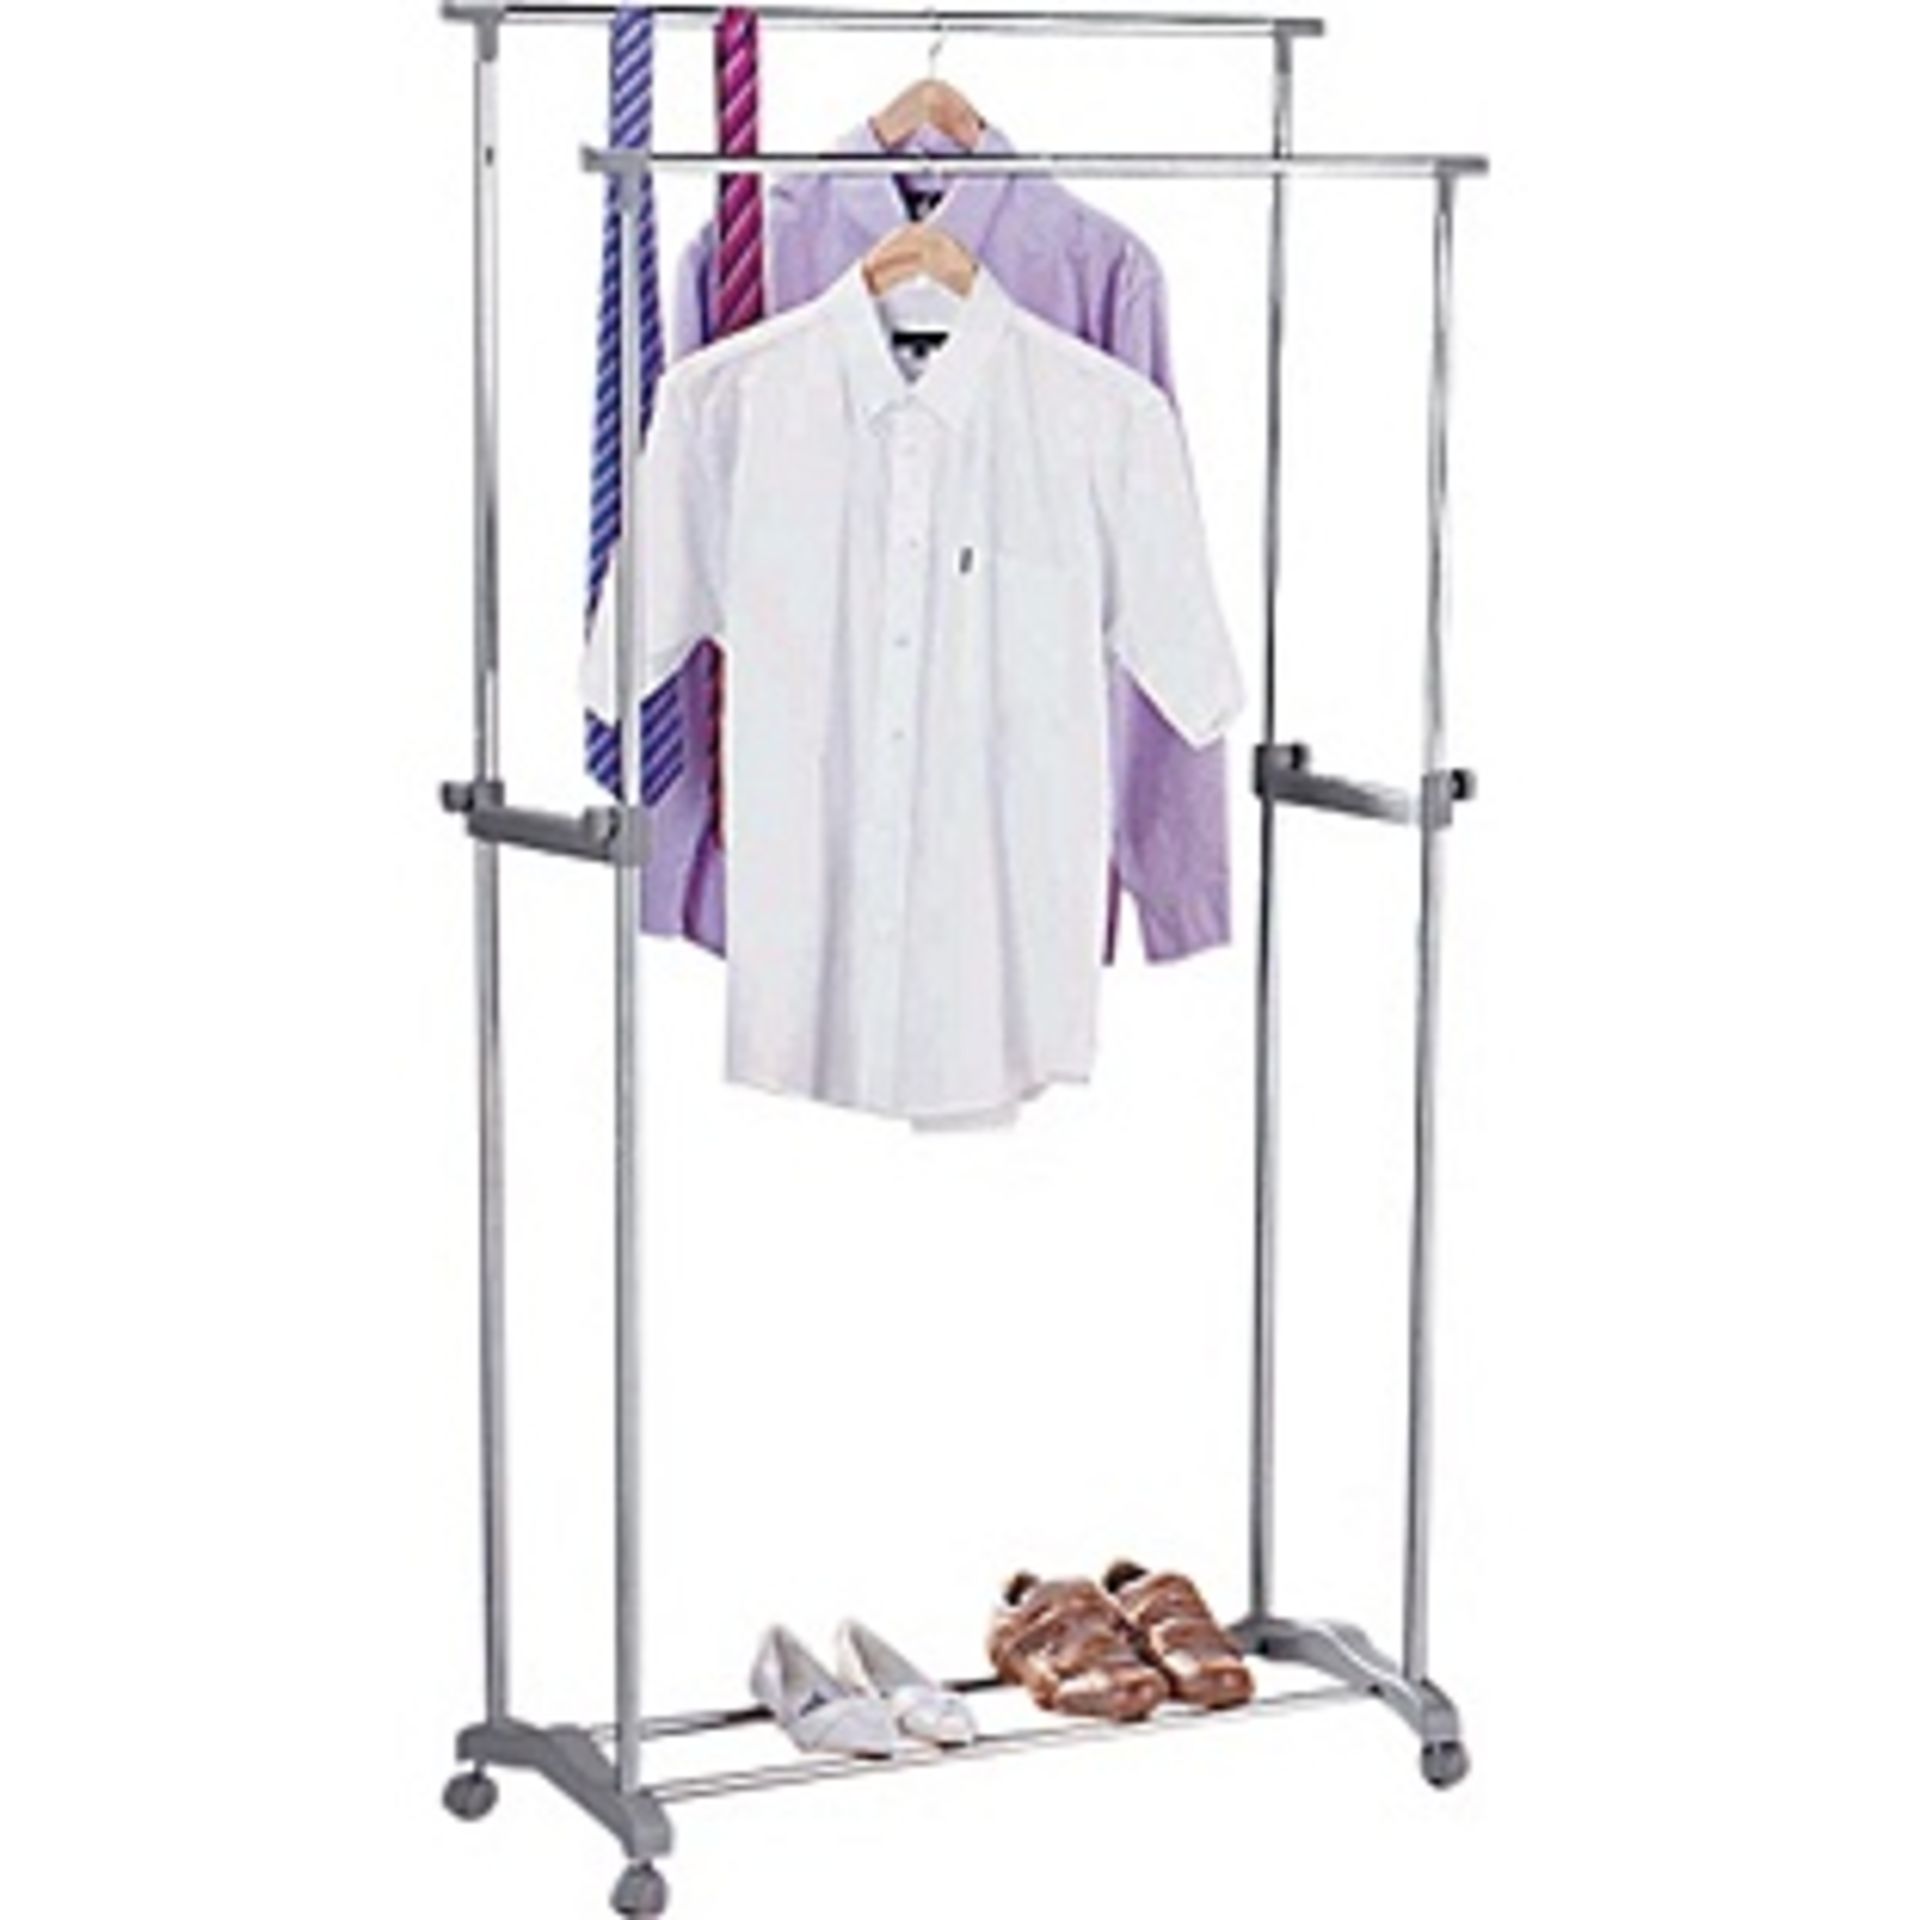 HOME Adjustable Double Clothes Rail - Silver. Size H101, extending to 167.5, W89cm. With Boxed.